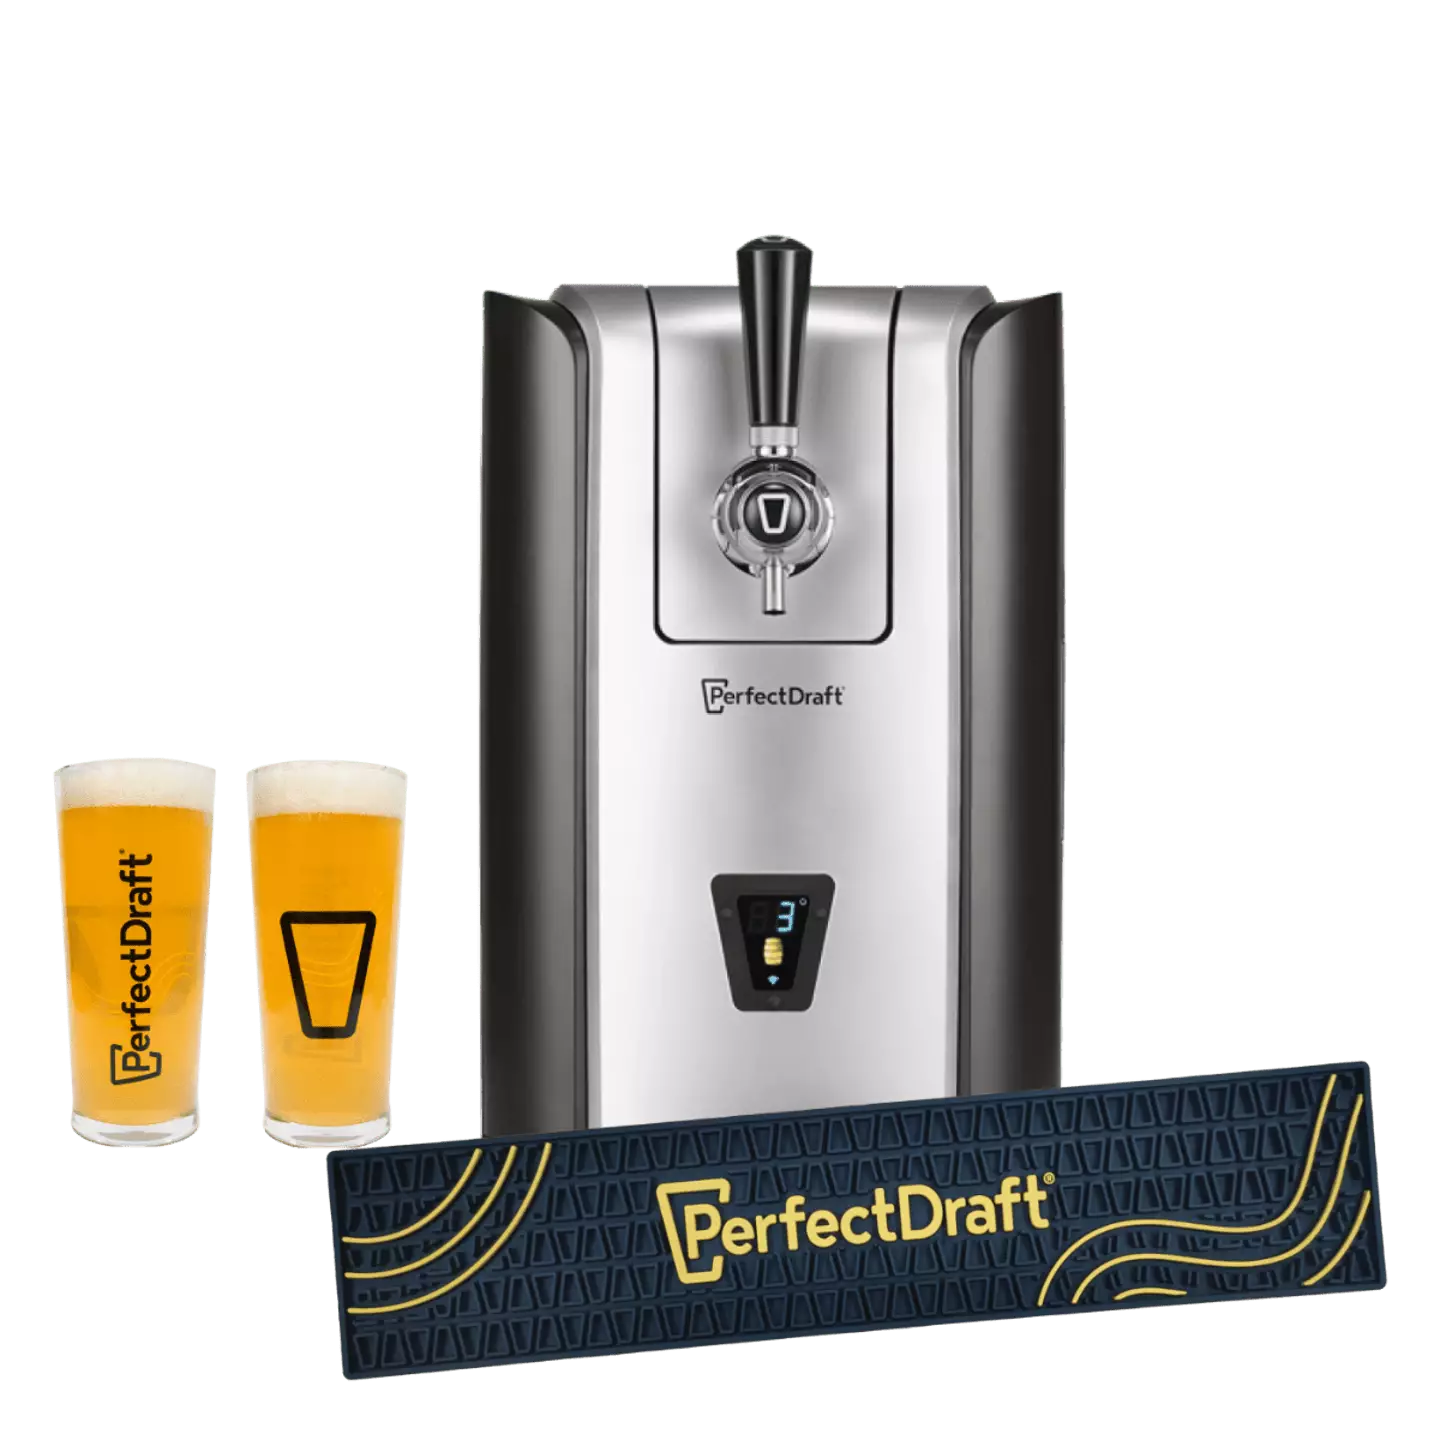 The new PerfectDraft Pro has game changing features fo the beer lover